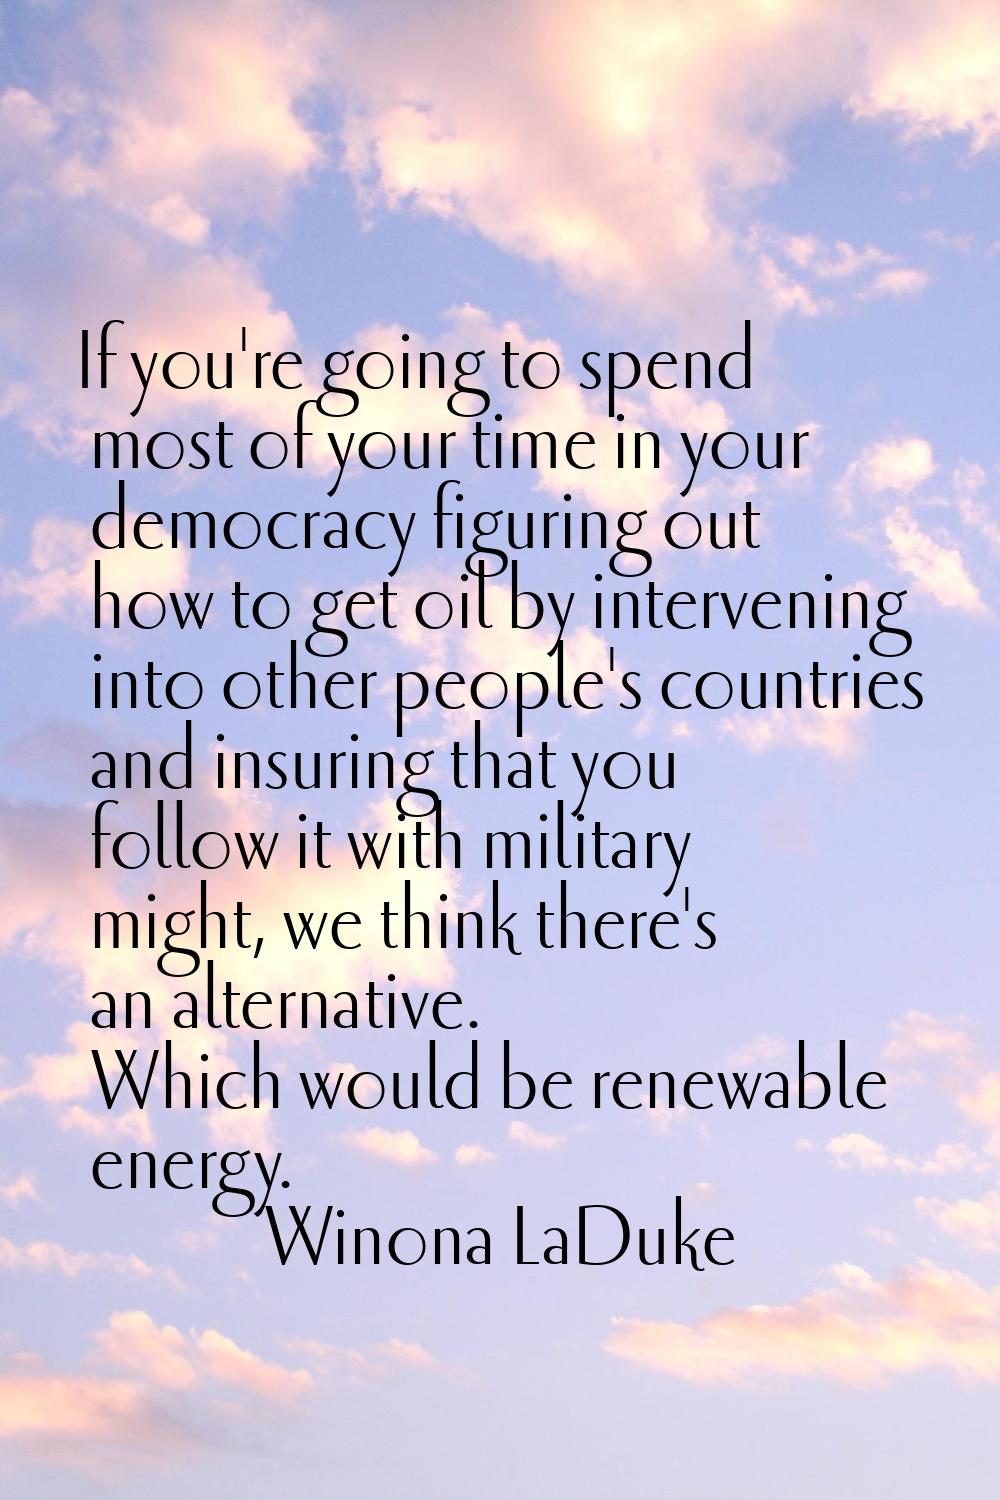 If you're going to spend most of your time in your democracy figuring out how to get oil by interve